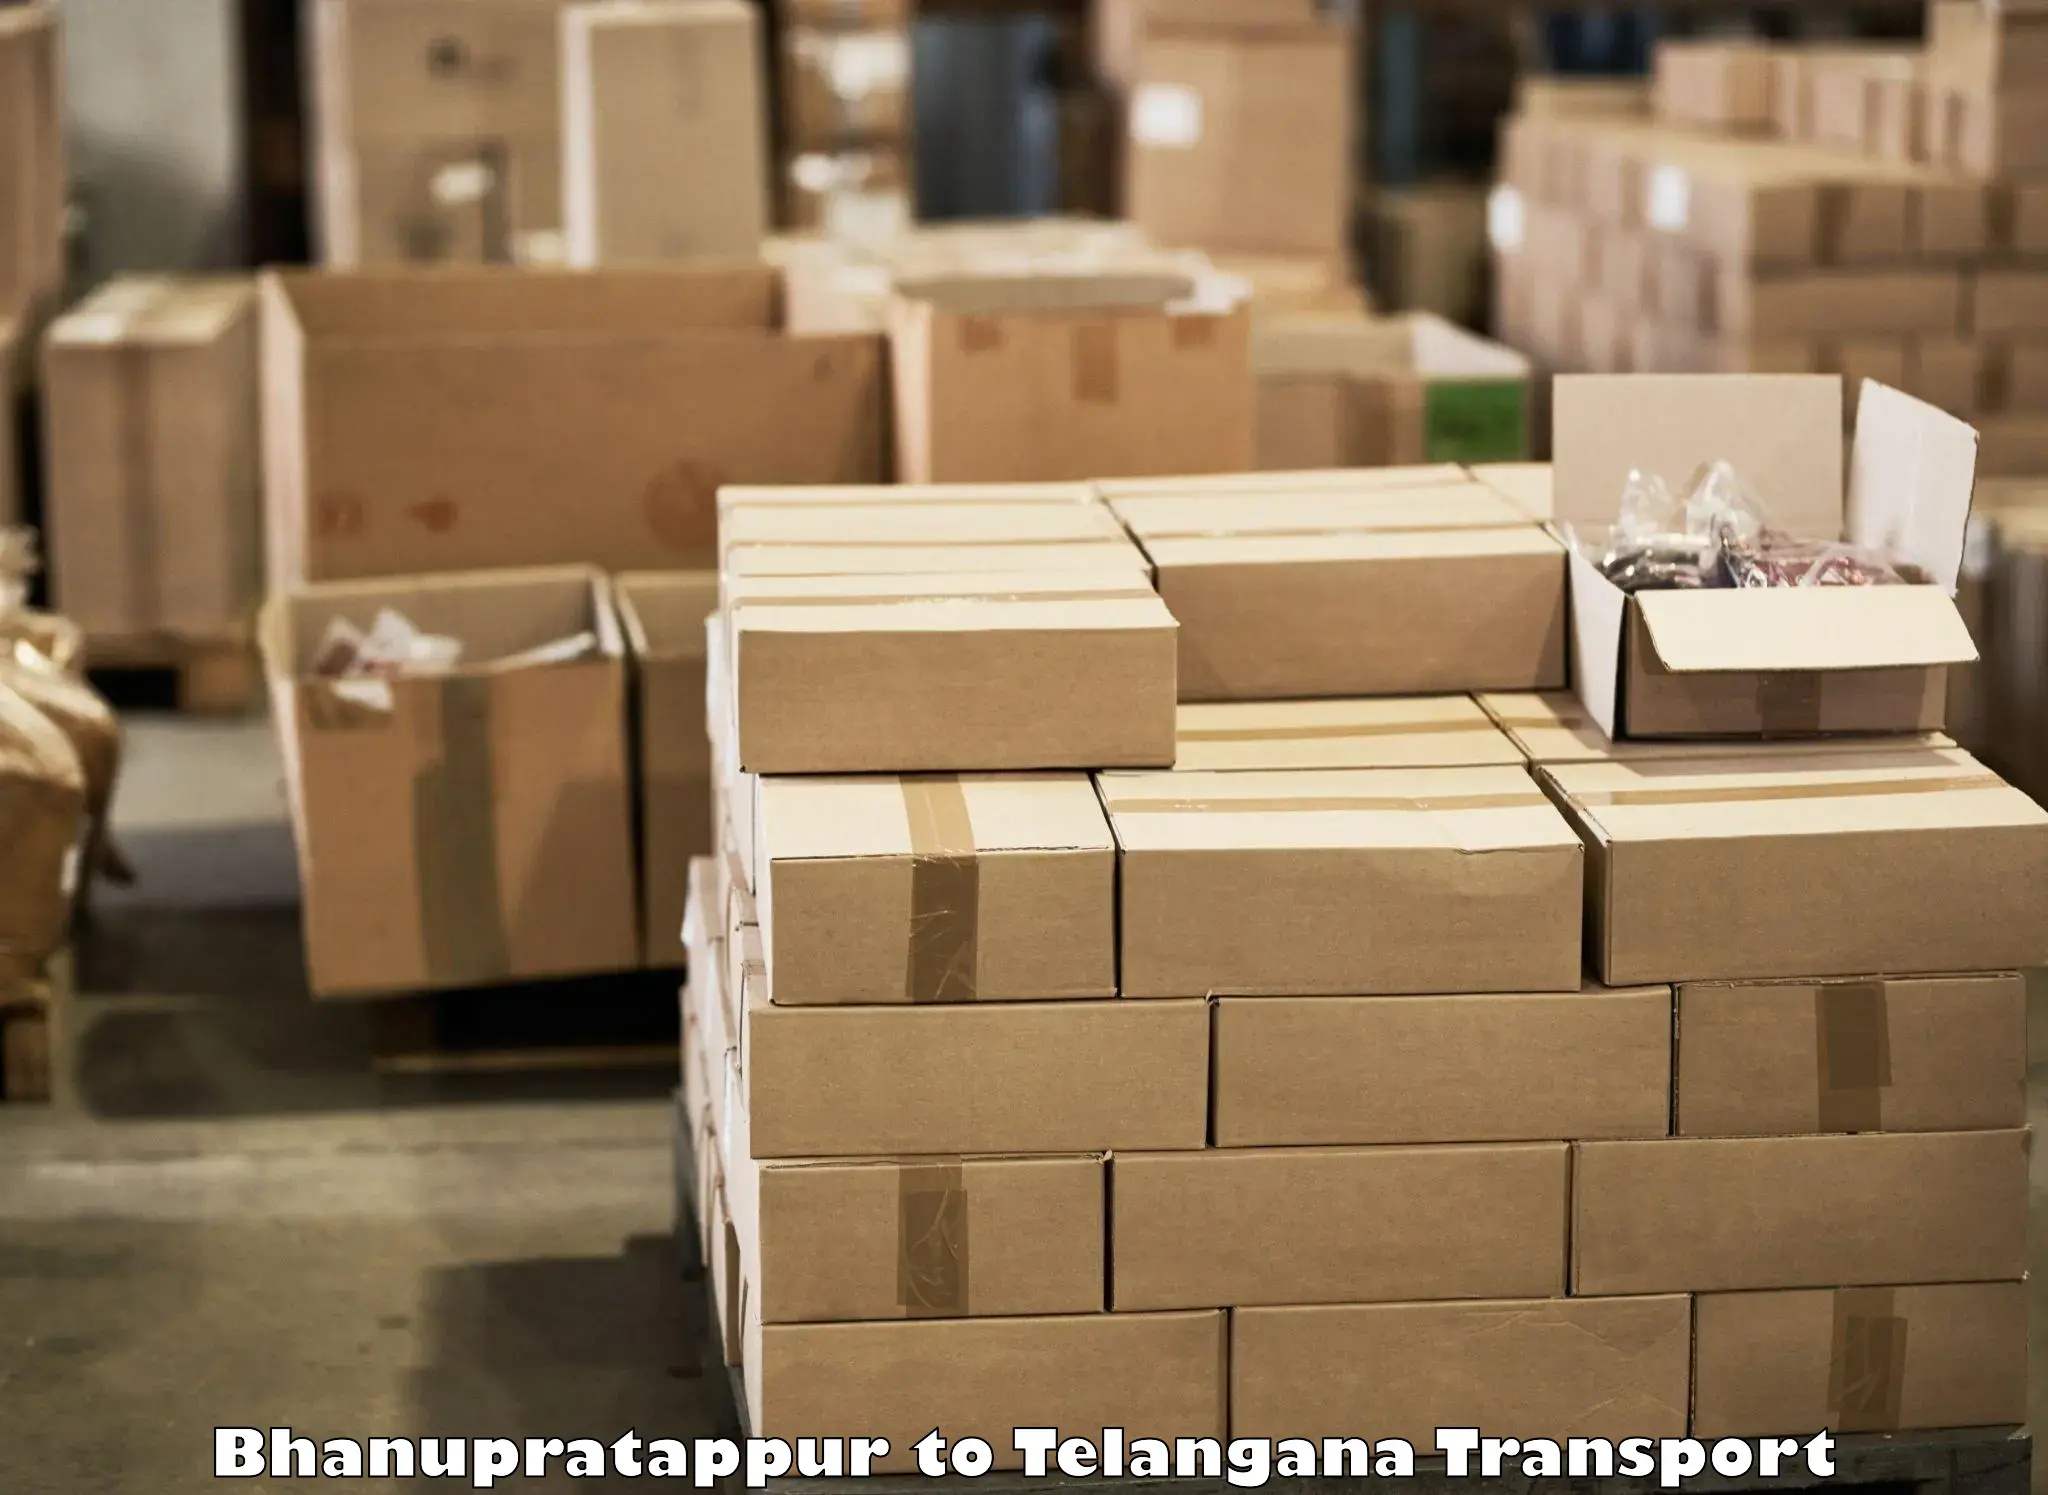 Express transport services in Bhanupratappur to Mancherial